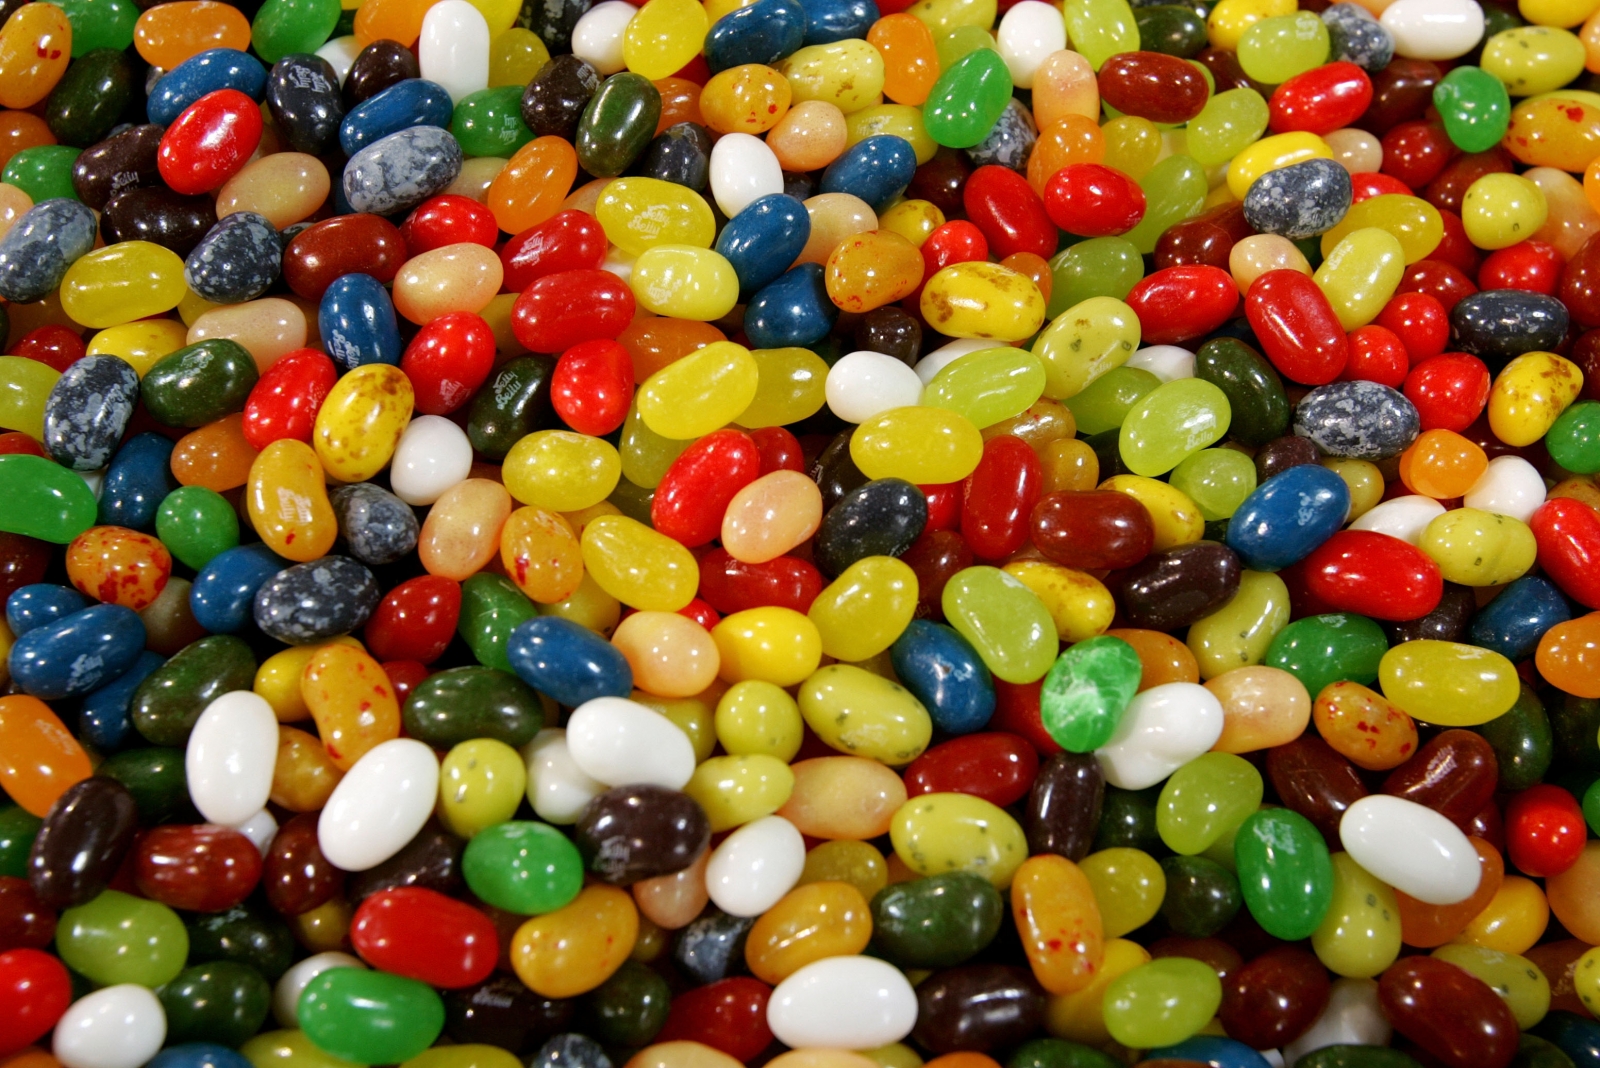 Sugar In Jelly Bellies?